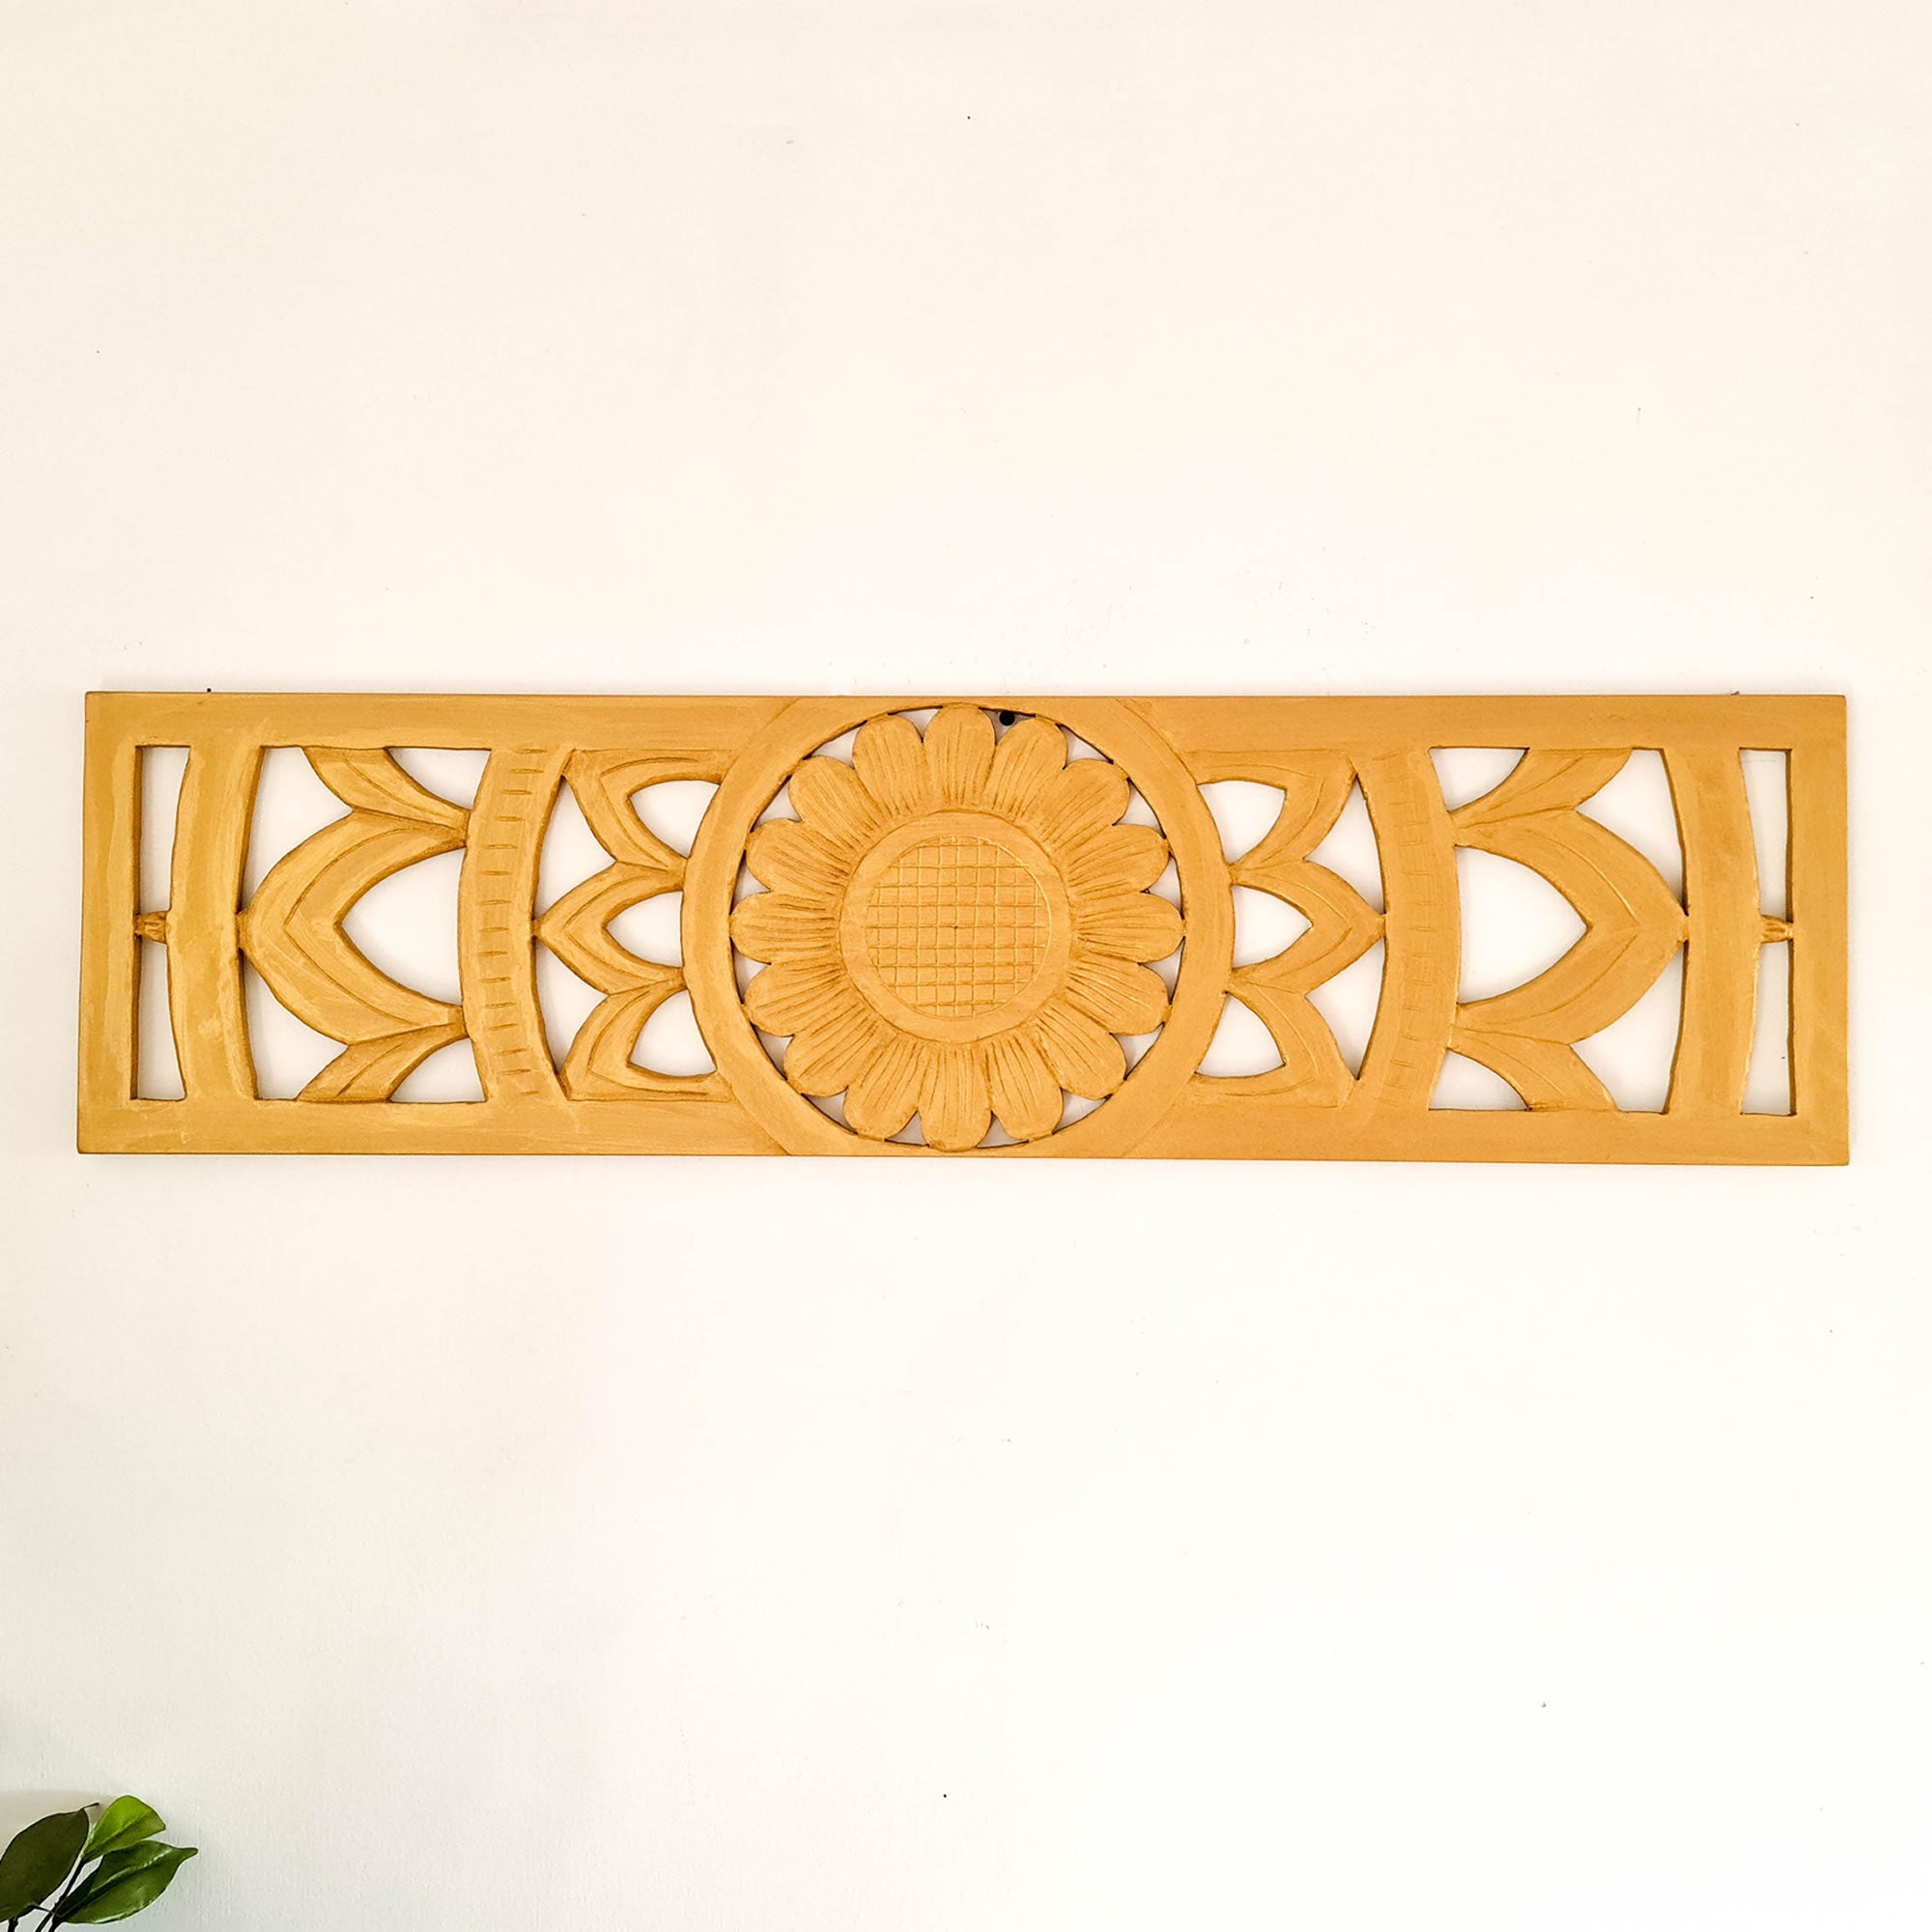 Carved Wooden Decorative Panel Art Sculpture Gold Mandala. Hand crafted by skilled craftsmen this piece is unique and simply amazing